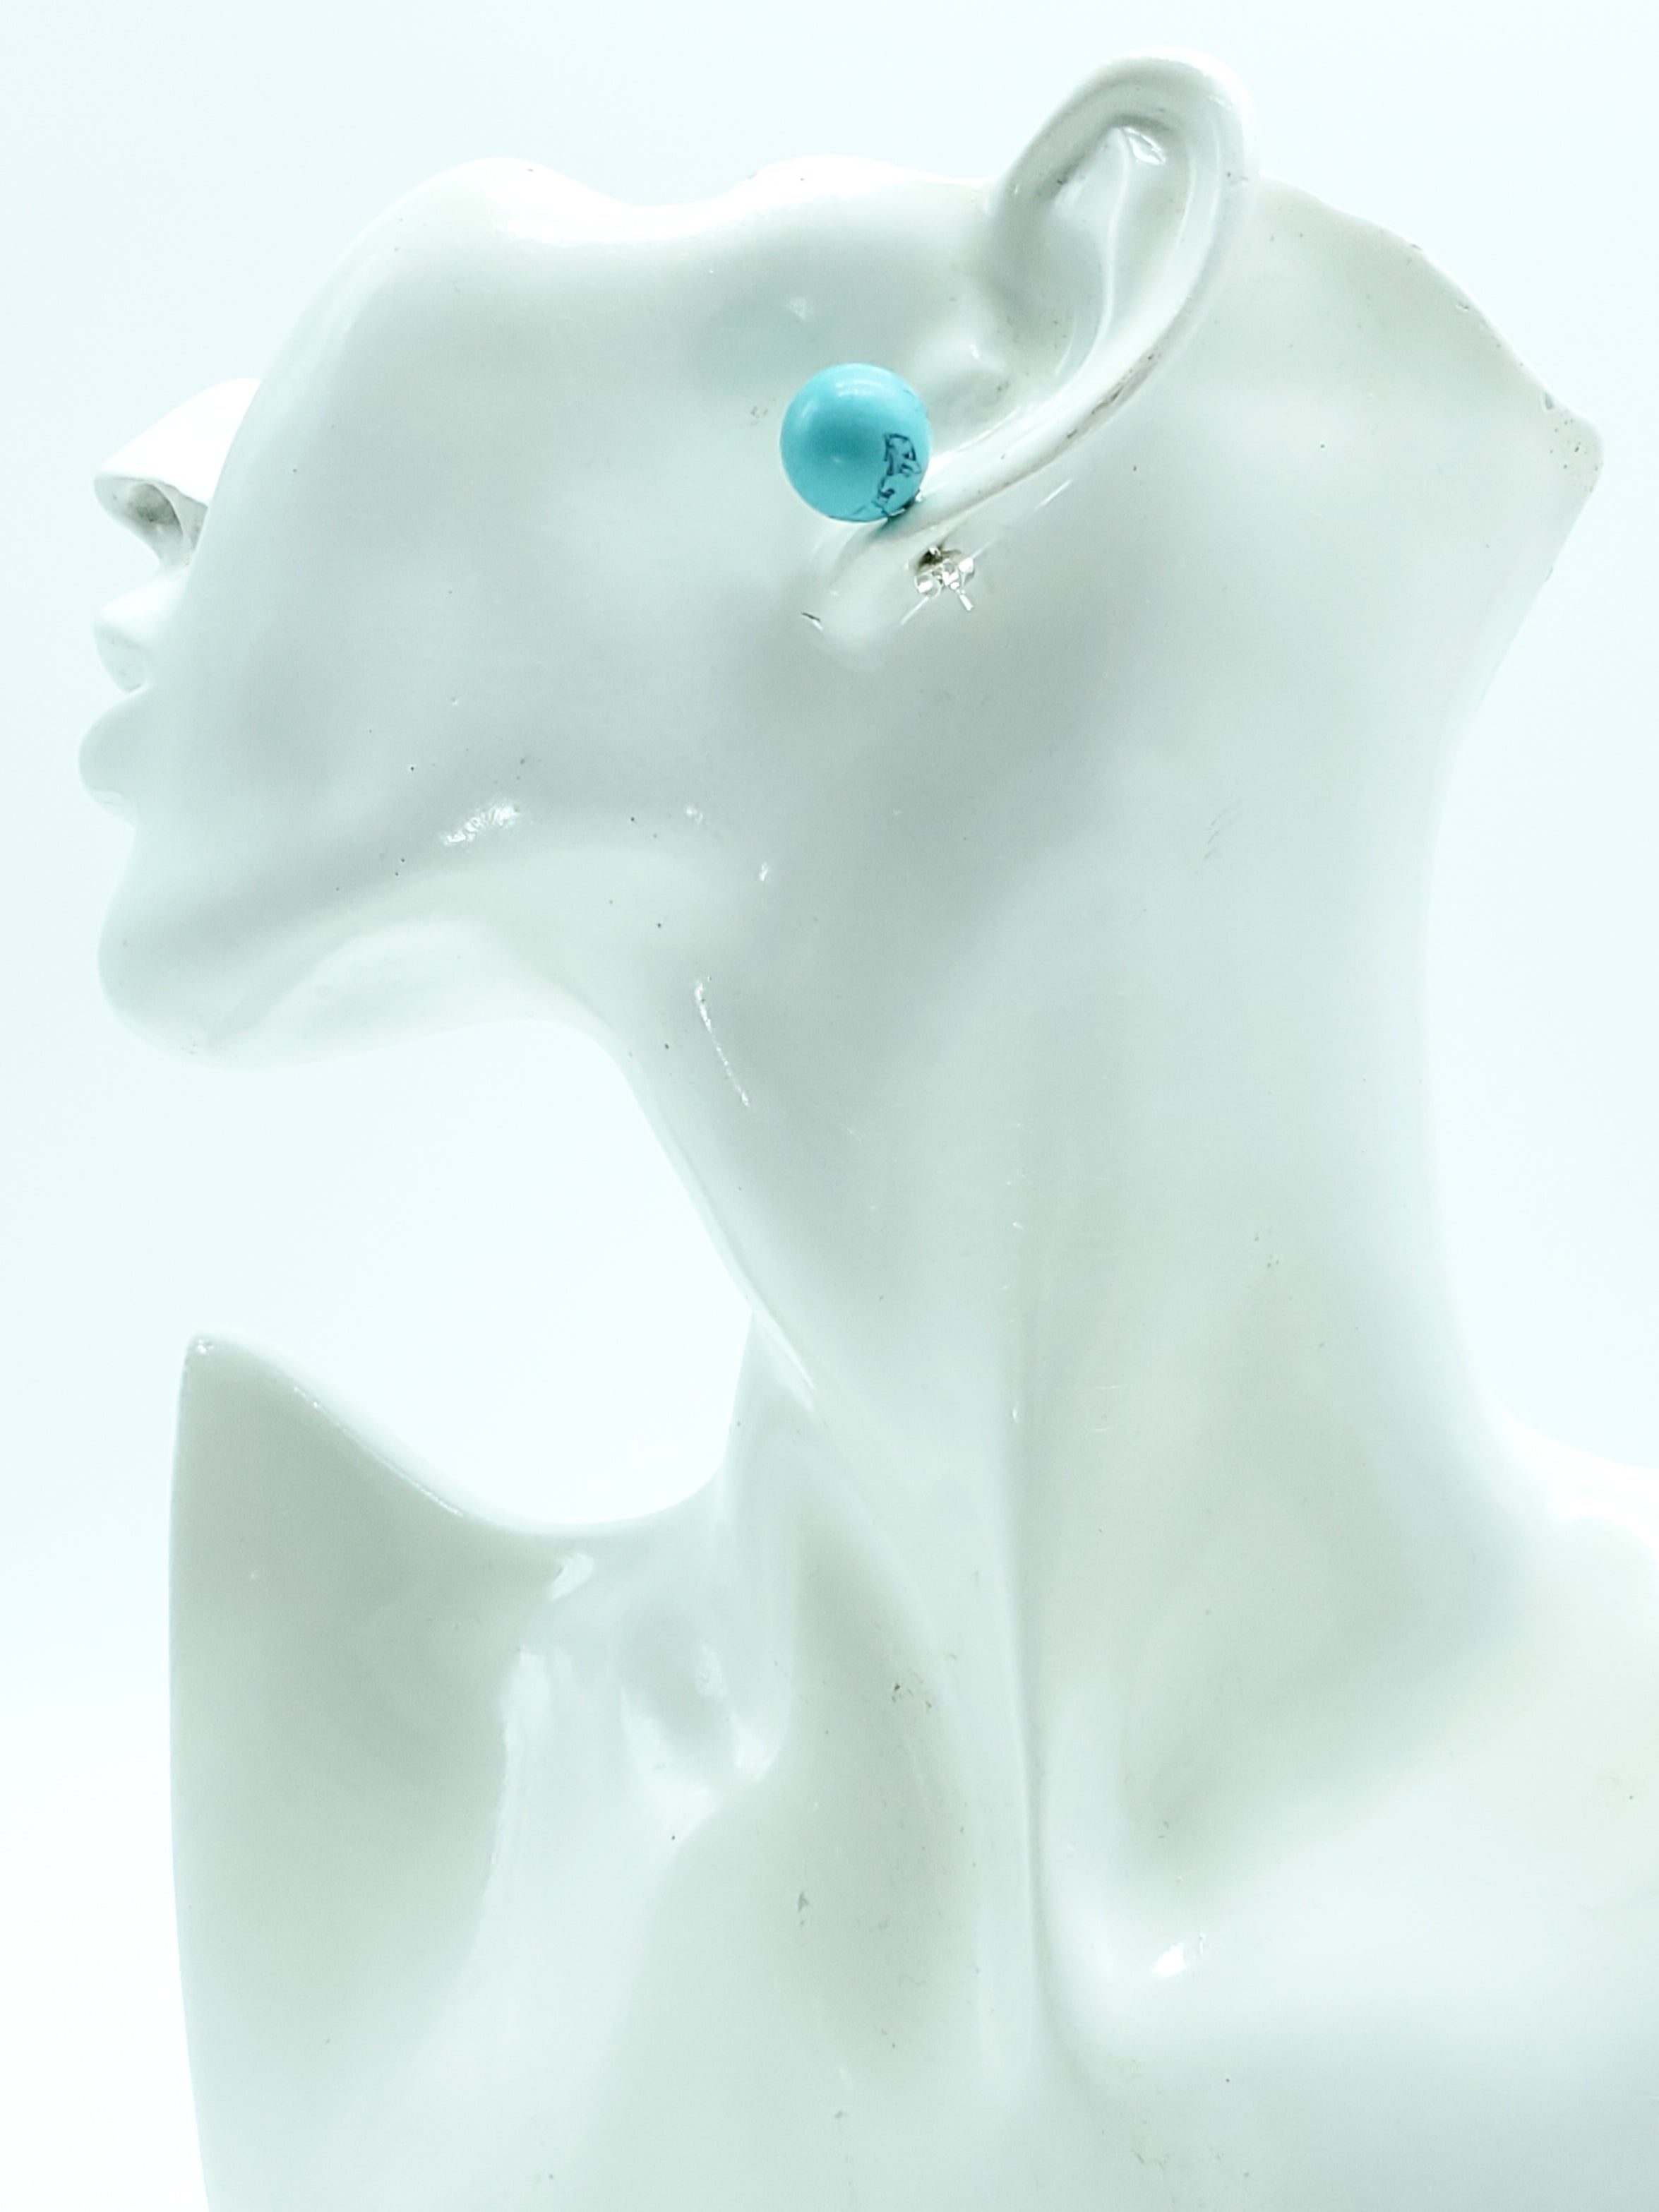 Turquoise Earrings on Sterling Silver Studs - The Caffeinated Raven